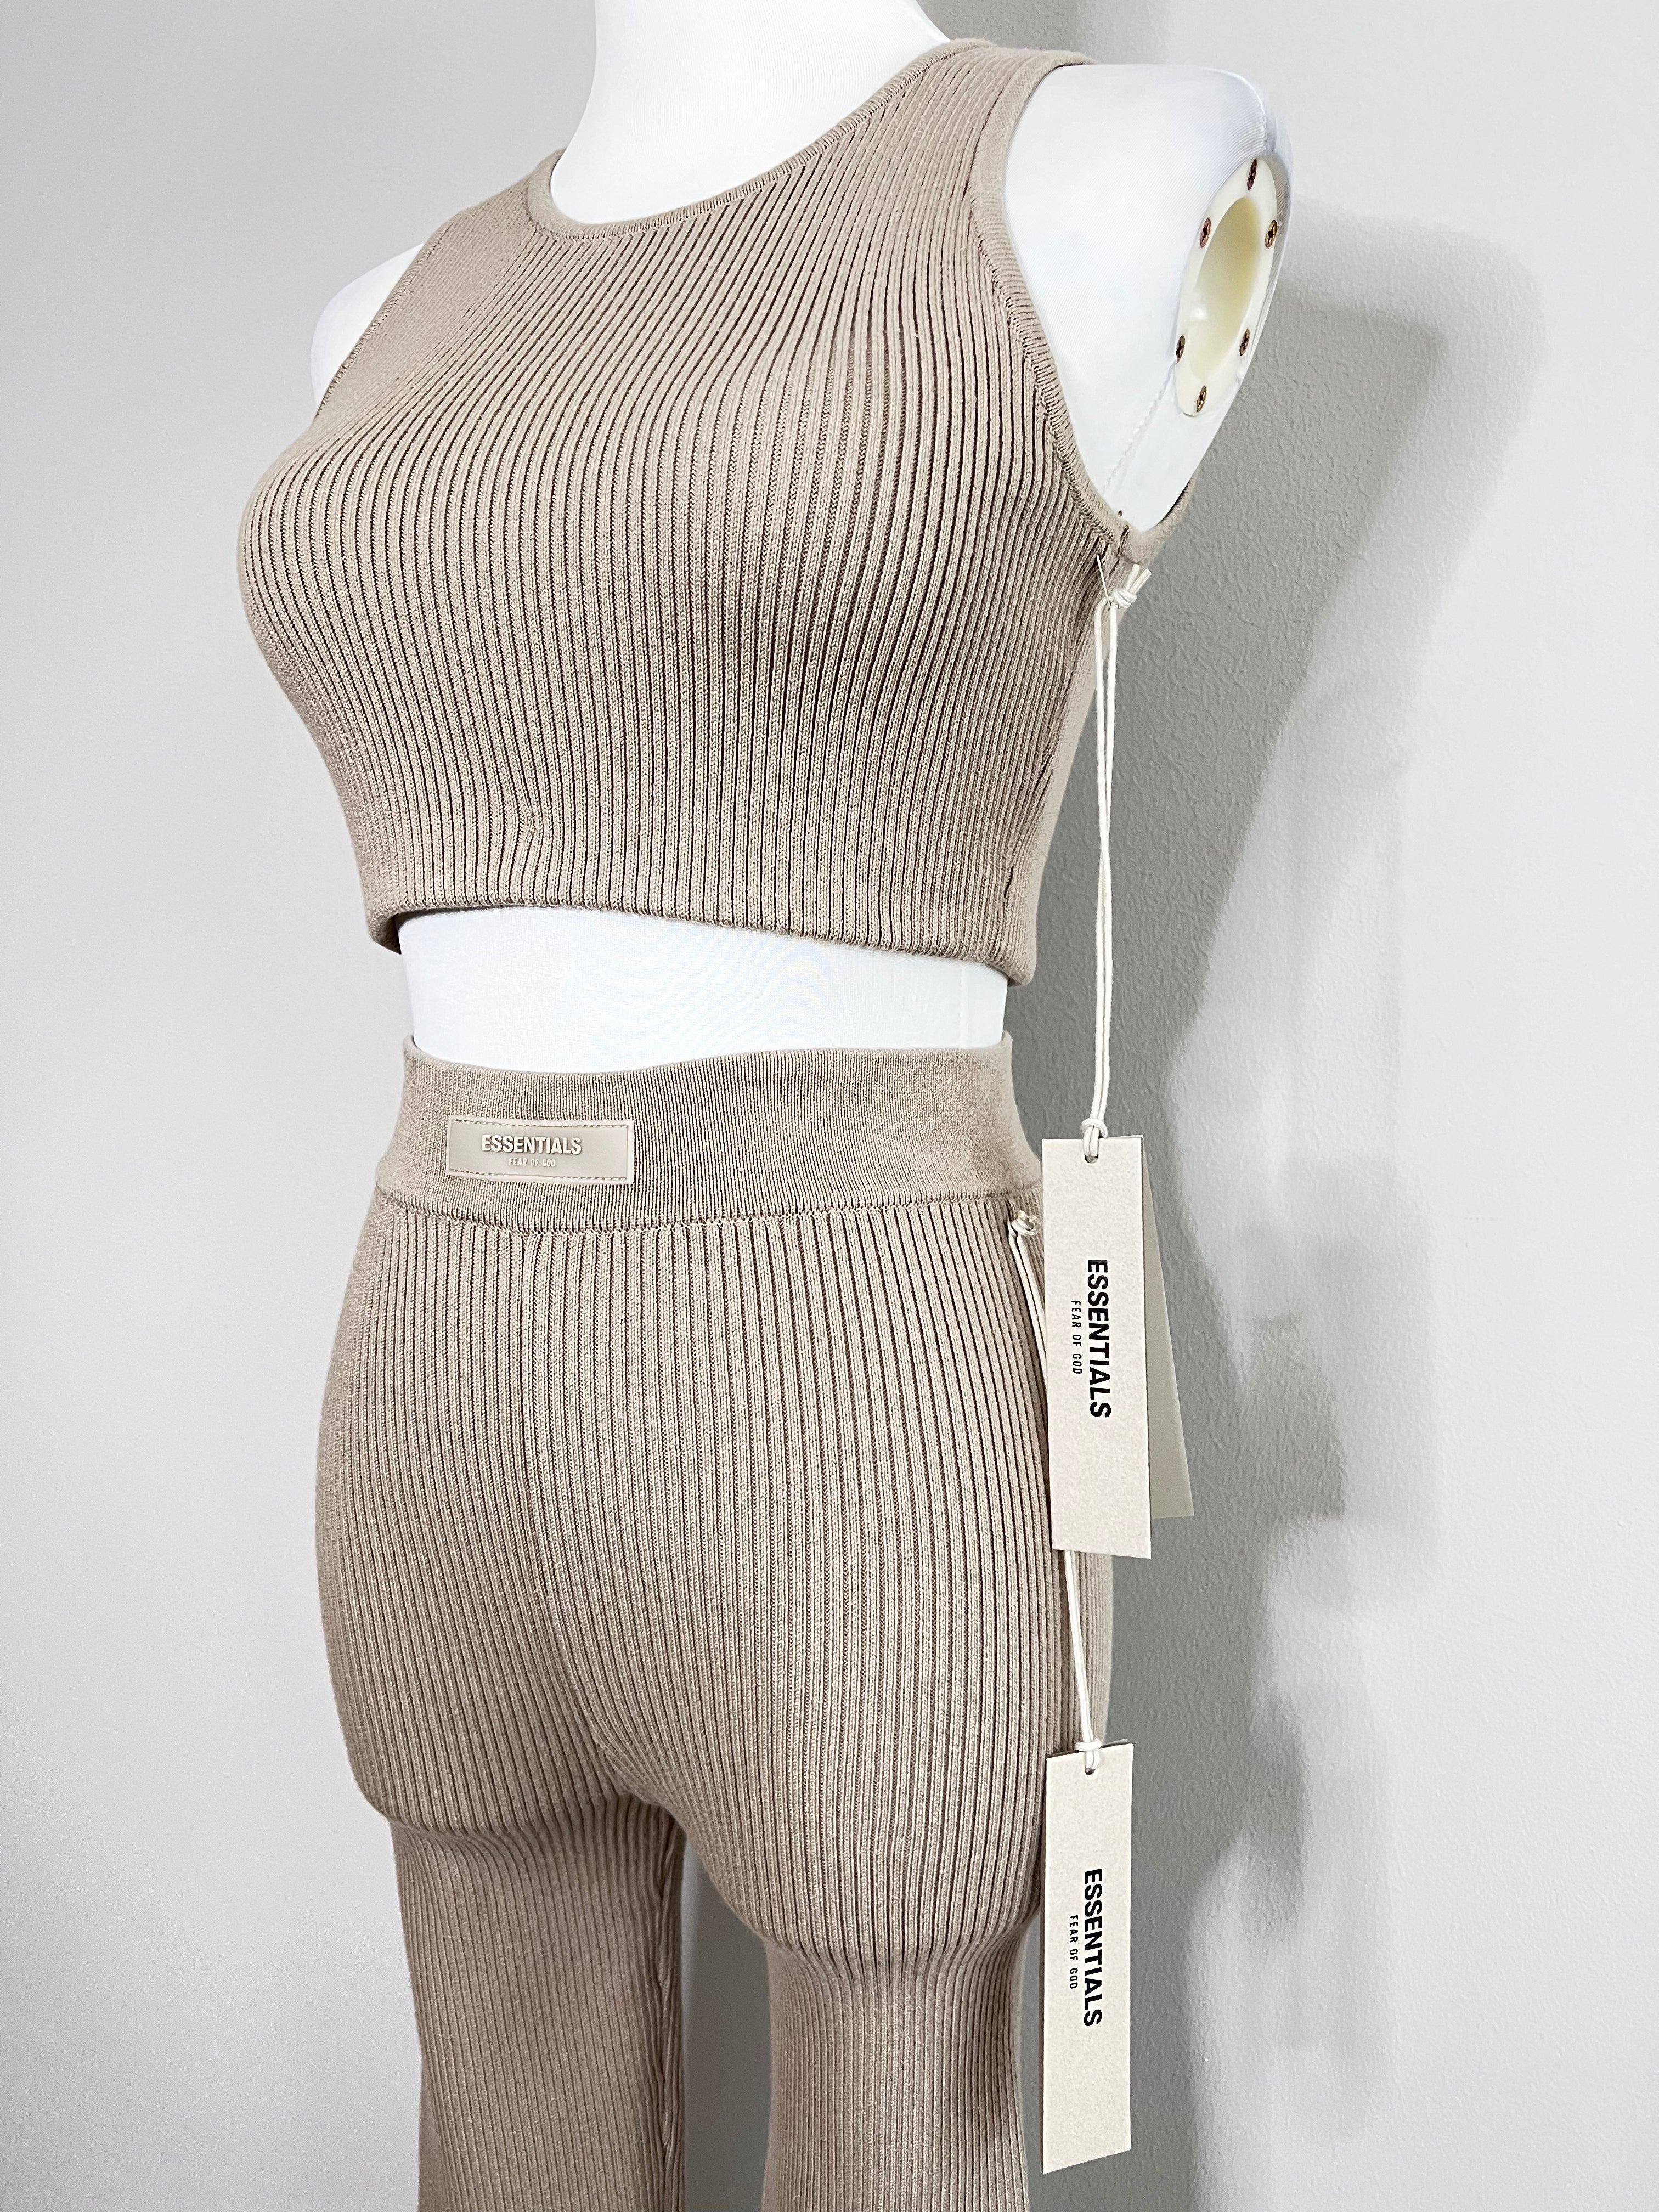 A set of knit elastic waistband with logo patch at front sports ribbed pants and sleevless crop in seal nude color - FEAR OF GOD ESSENTIALS